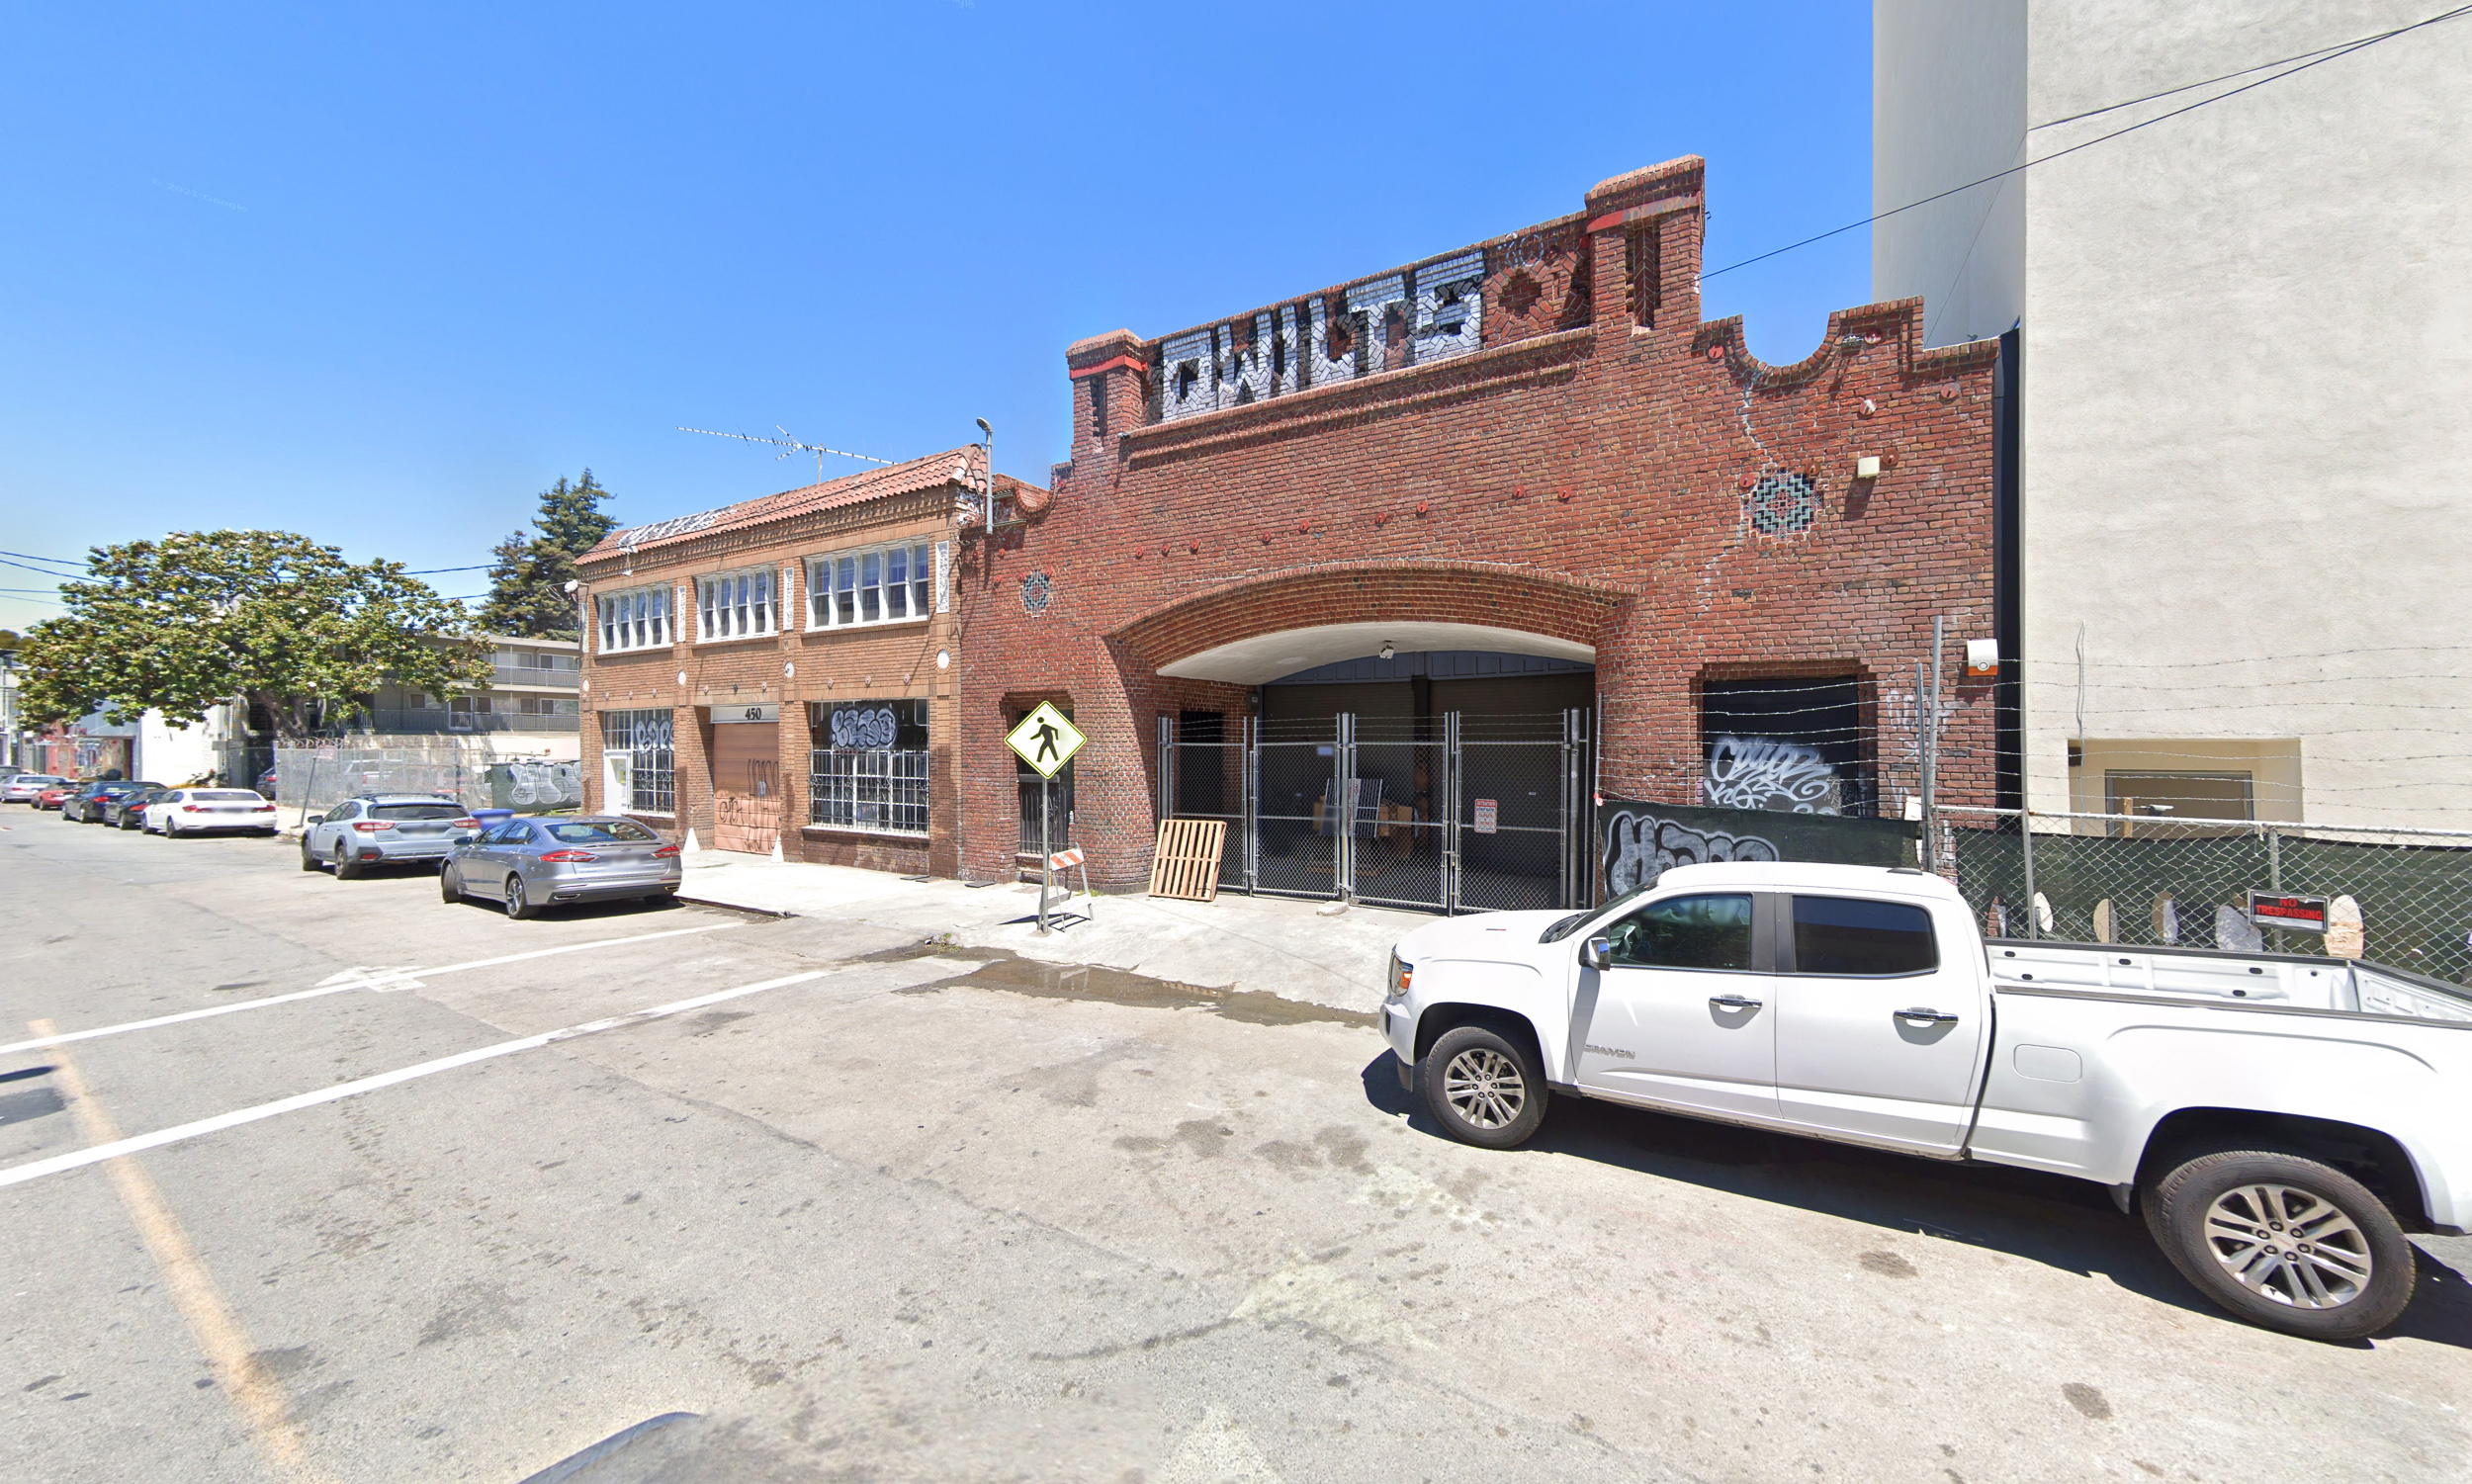 444 and 450 24th Street historic facades to be preserved in the future development, image via Google Street View